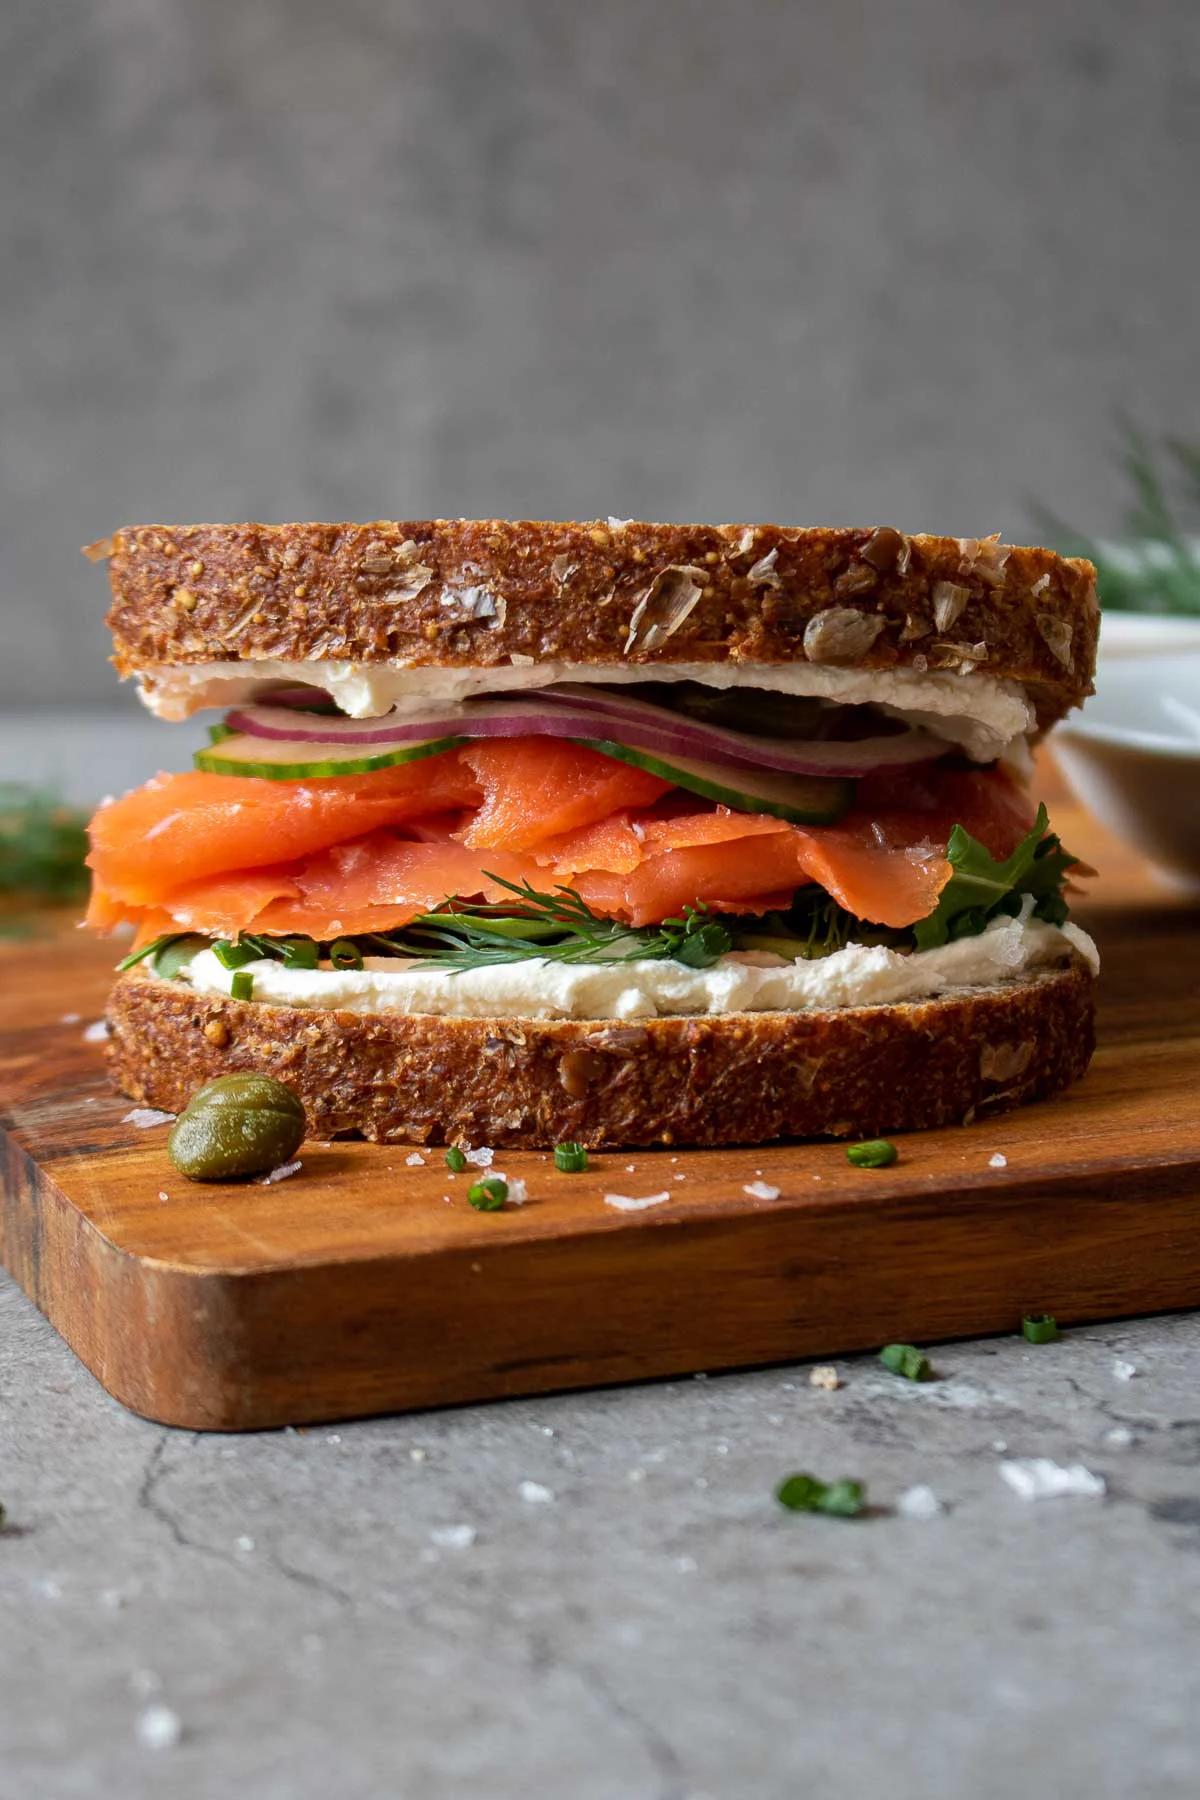 calories in smoked salmon sandwich with cream cheese - How many calories are in a salmon and cream cheese sandwich